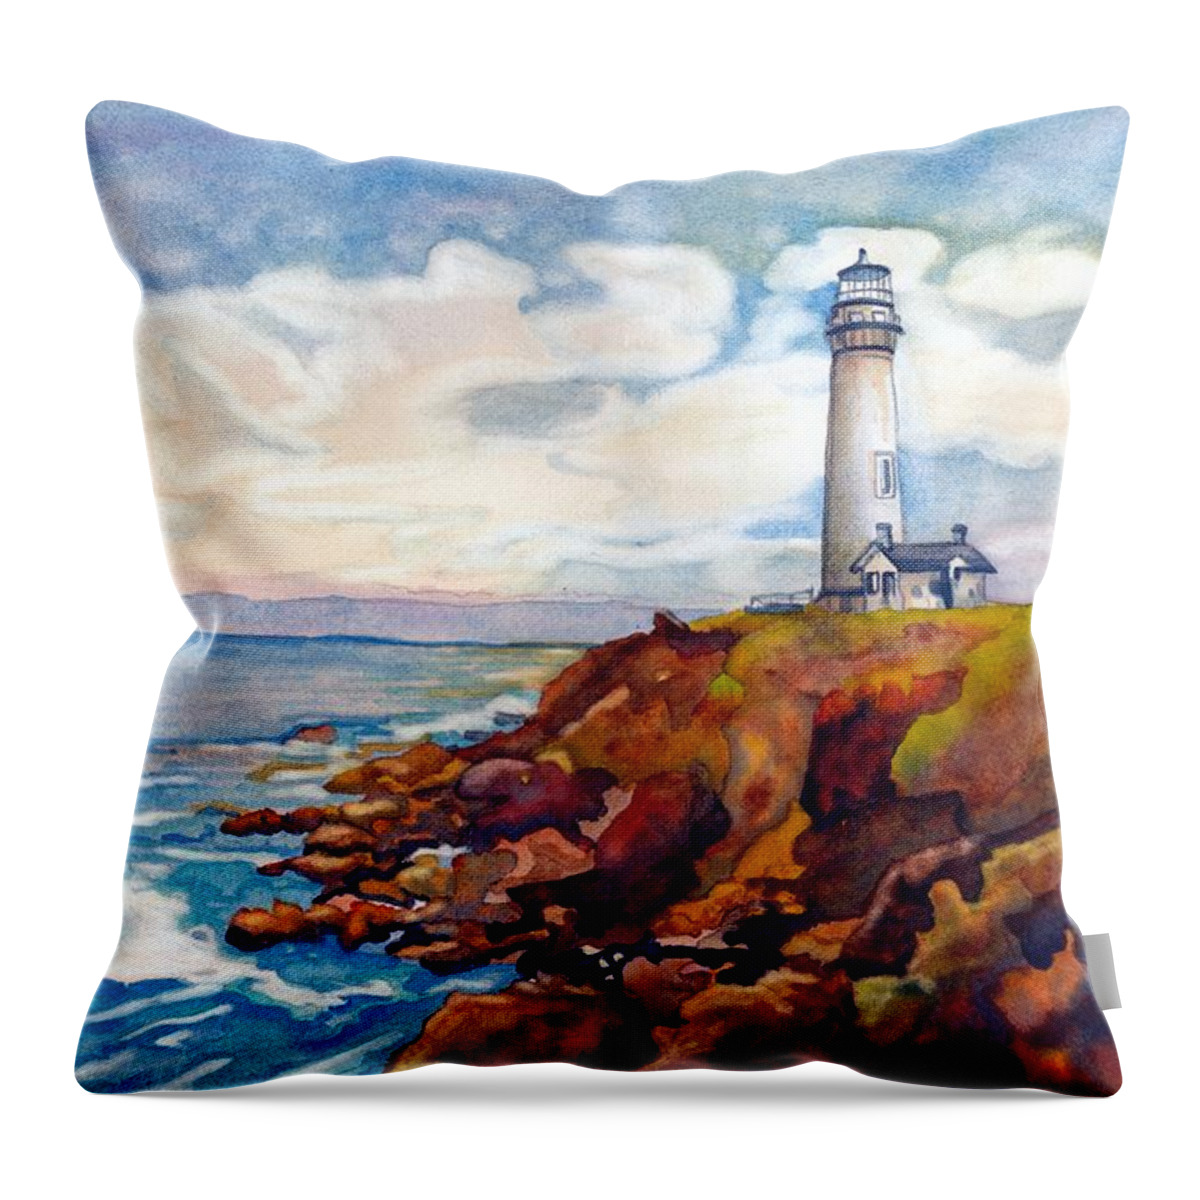 Watercolor Throw Pillow featuring the painting Spirit Light by Gerald Carpenter